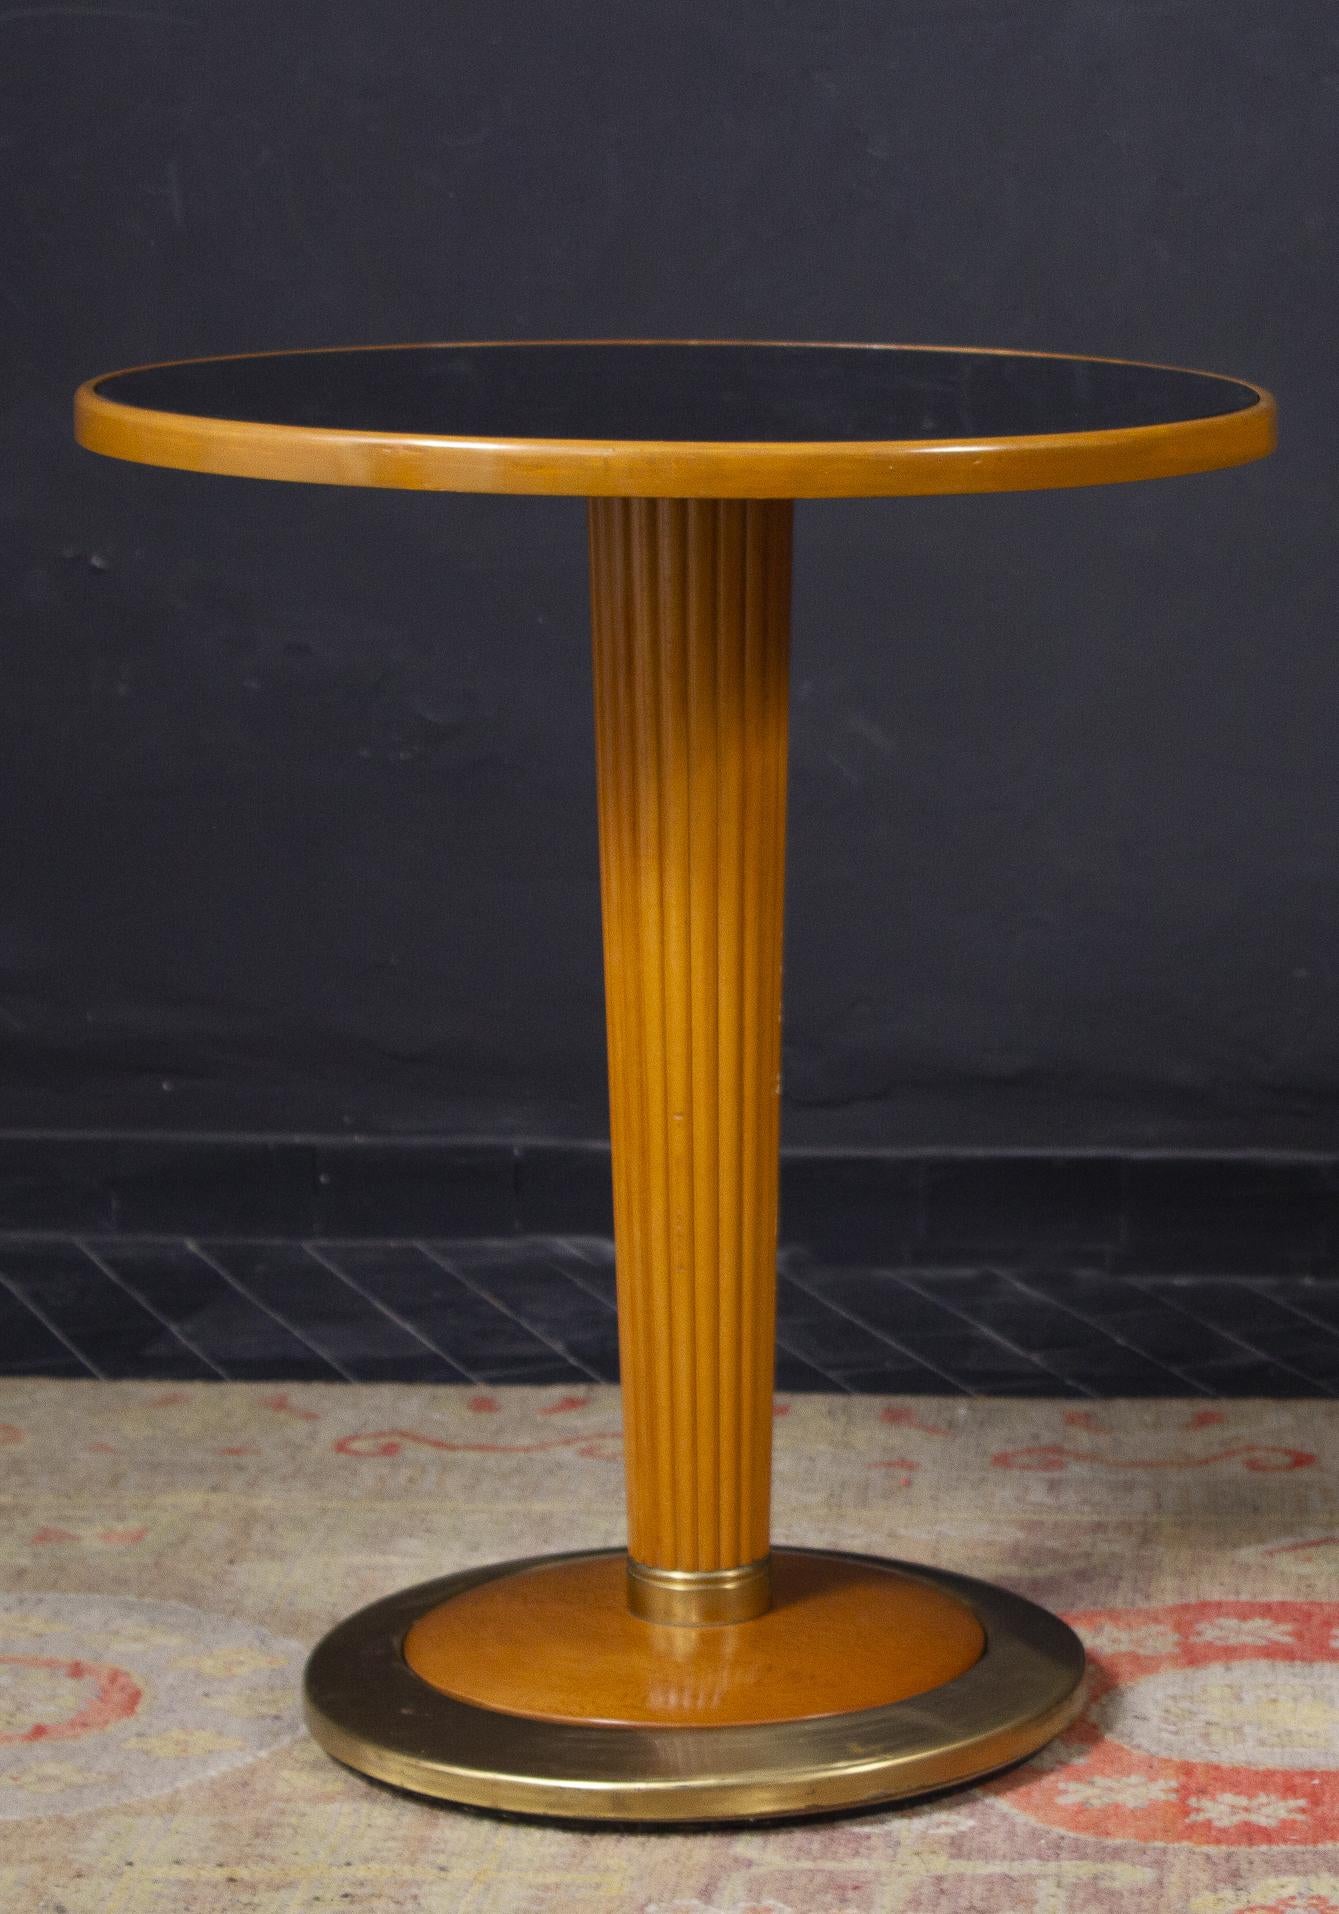 20th Century Pair of Italian Midcentury Side Tables with Black Mirror Top, 1950